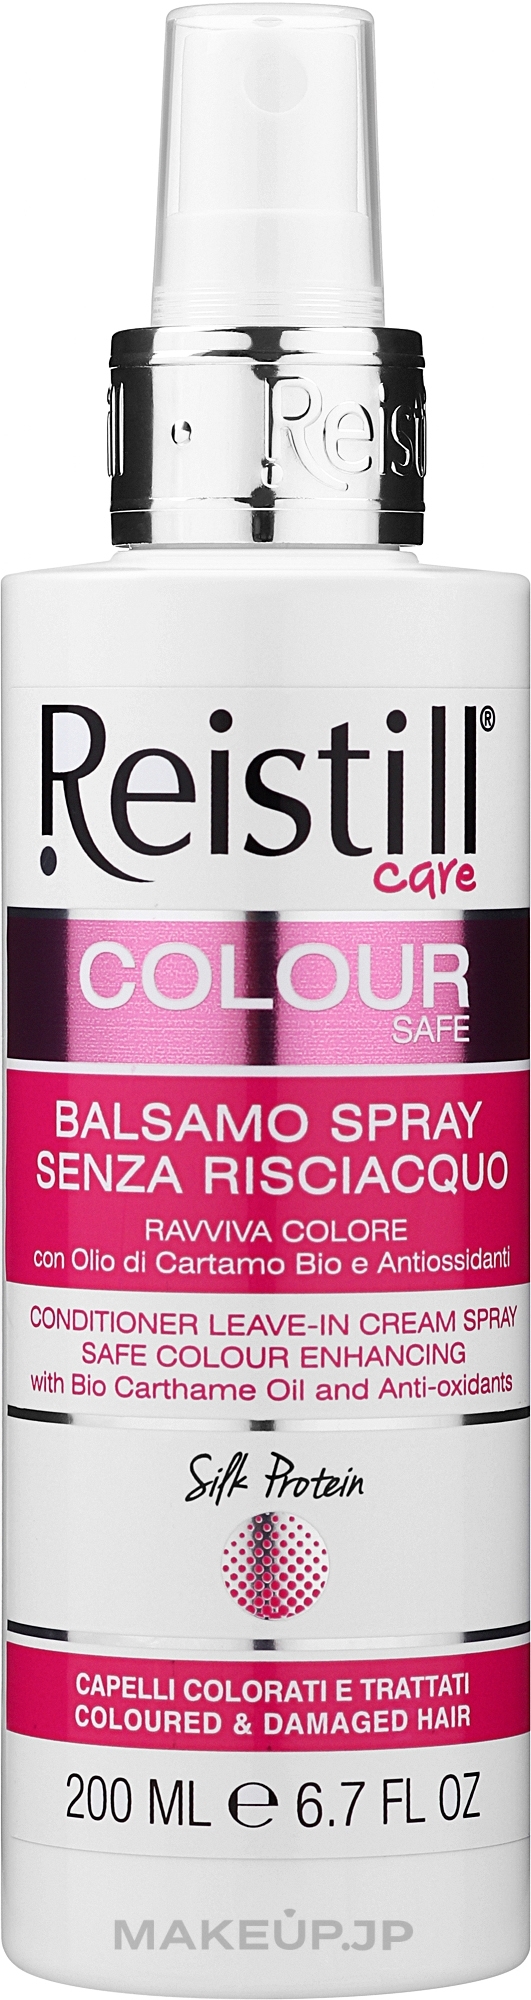 Color Protection Leave-In Conditioner - Reistill Colour Care Conditioner Leave-in Cream Spray — photo 200 ml